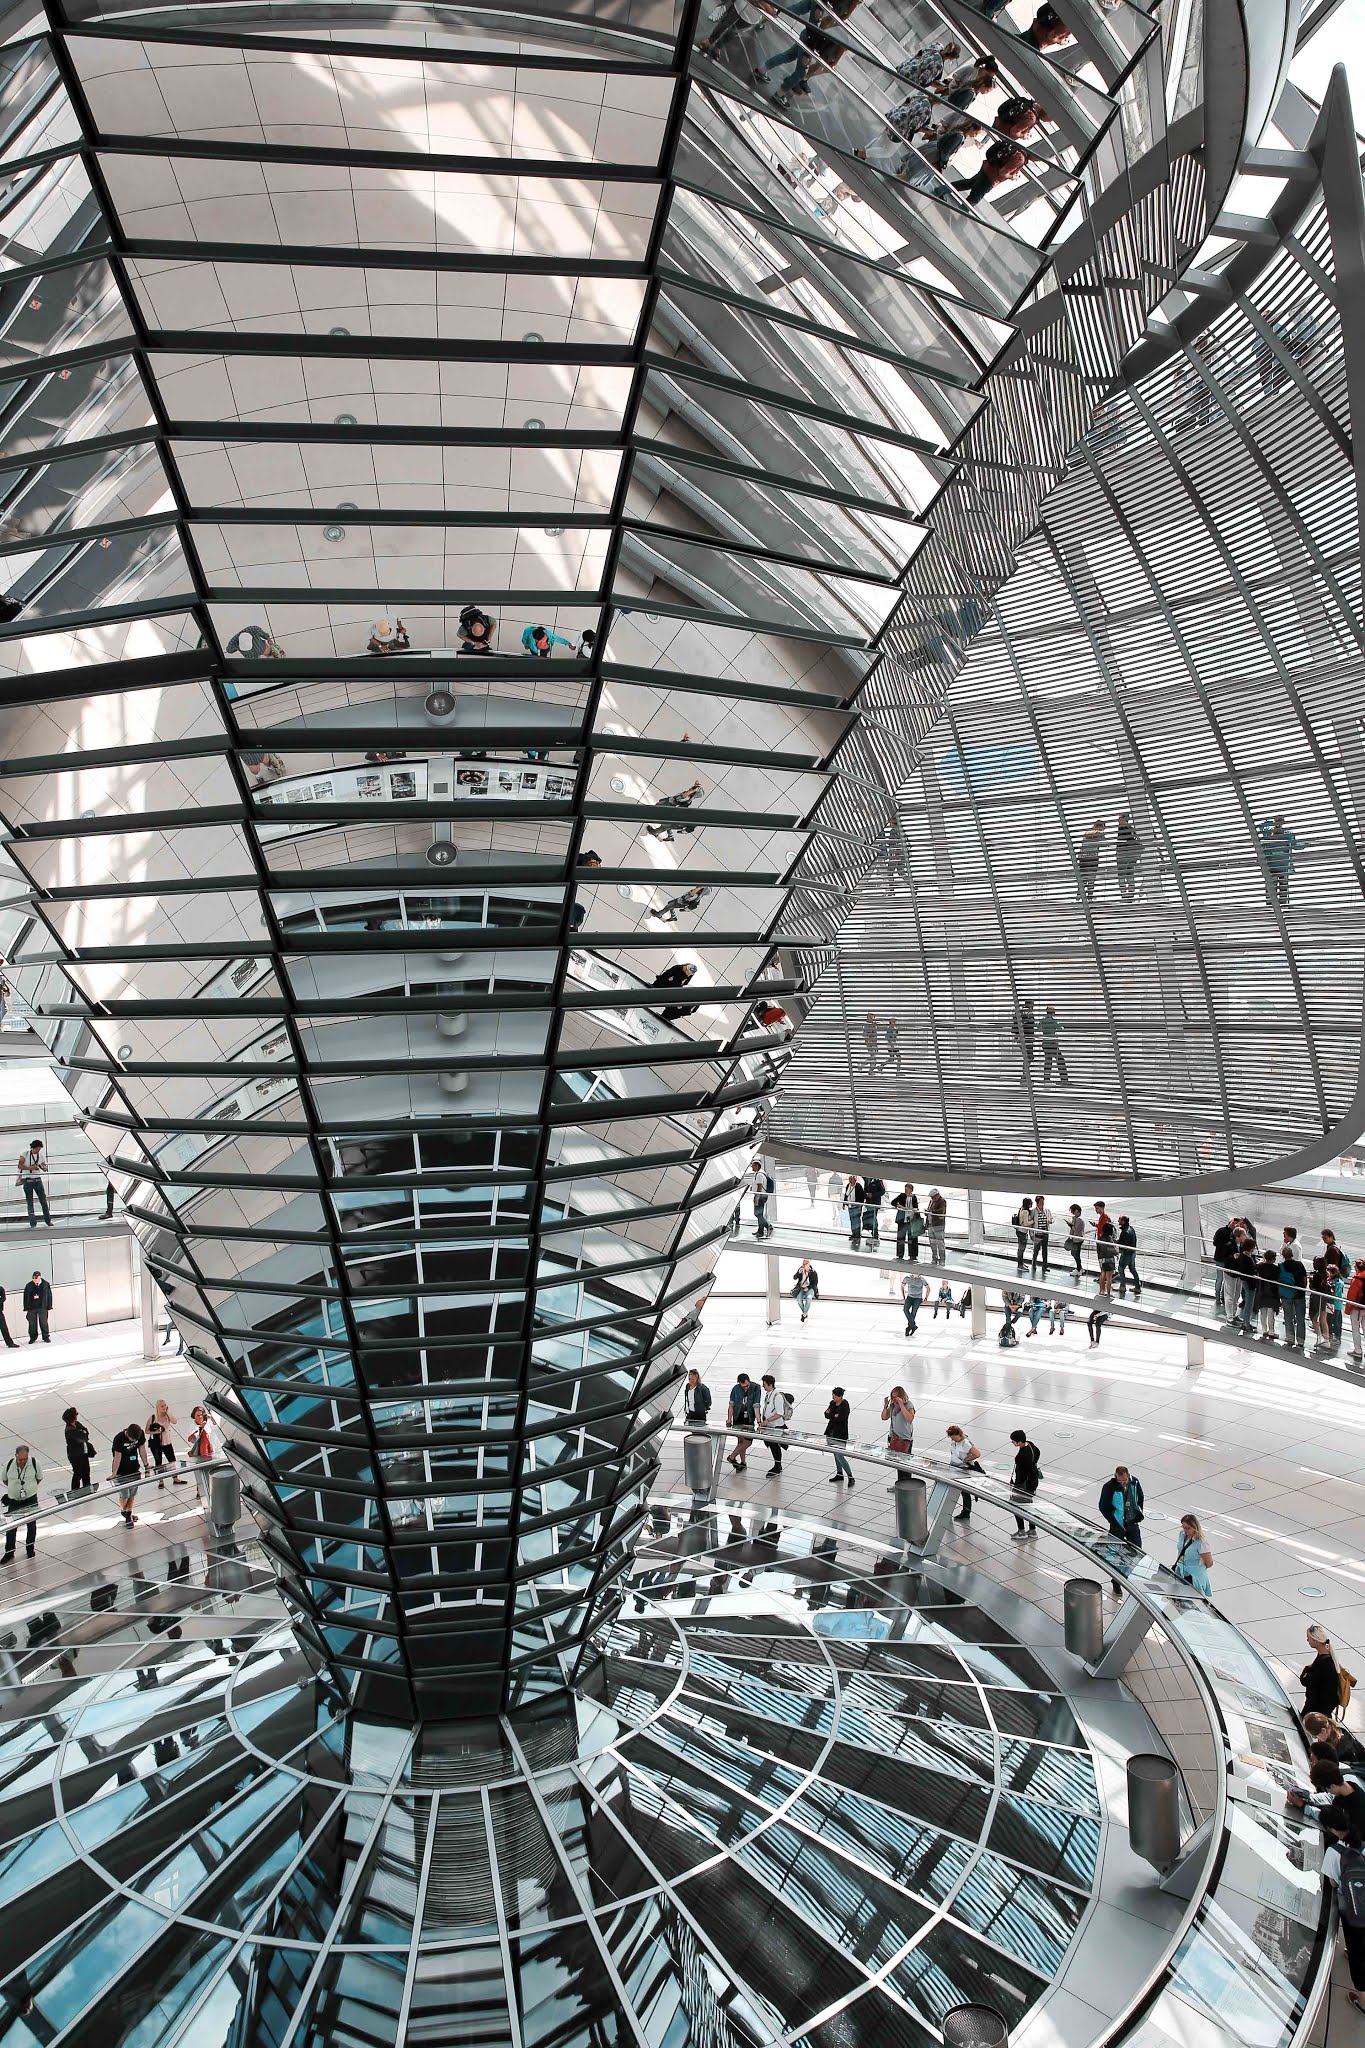 The Reichstag Building Dome